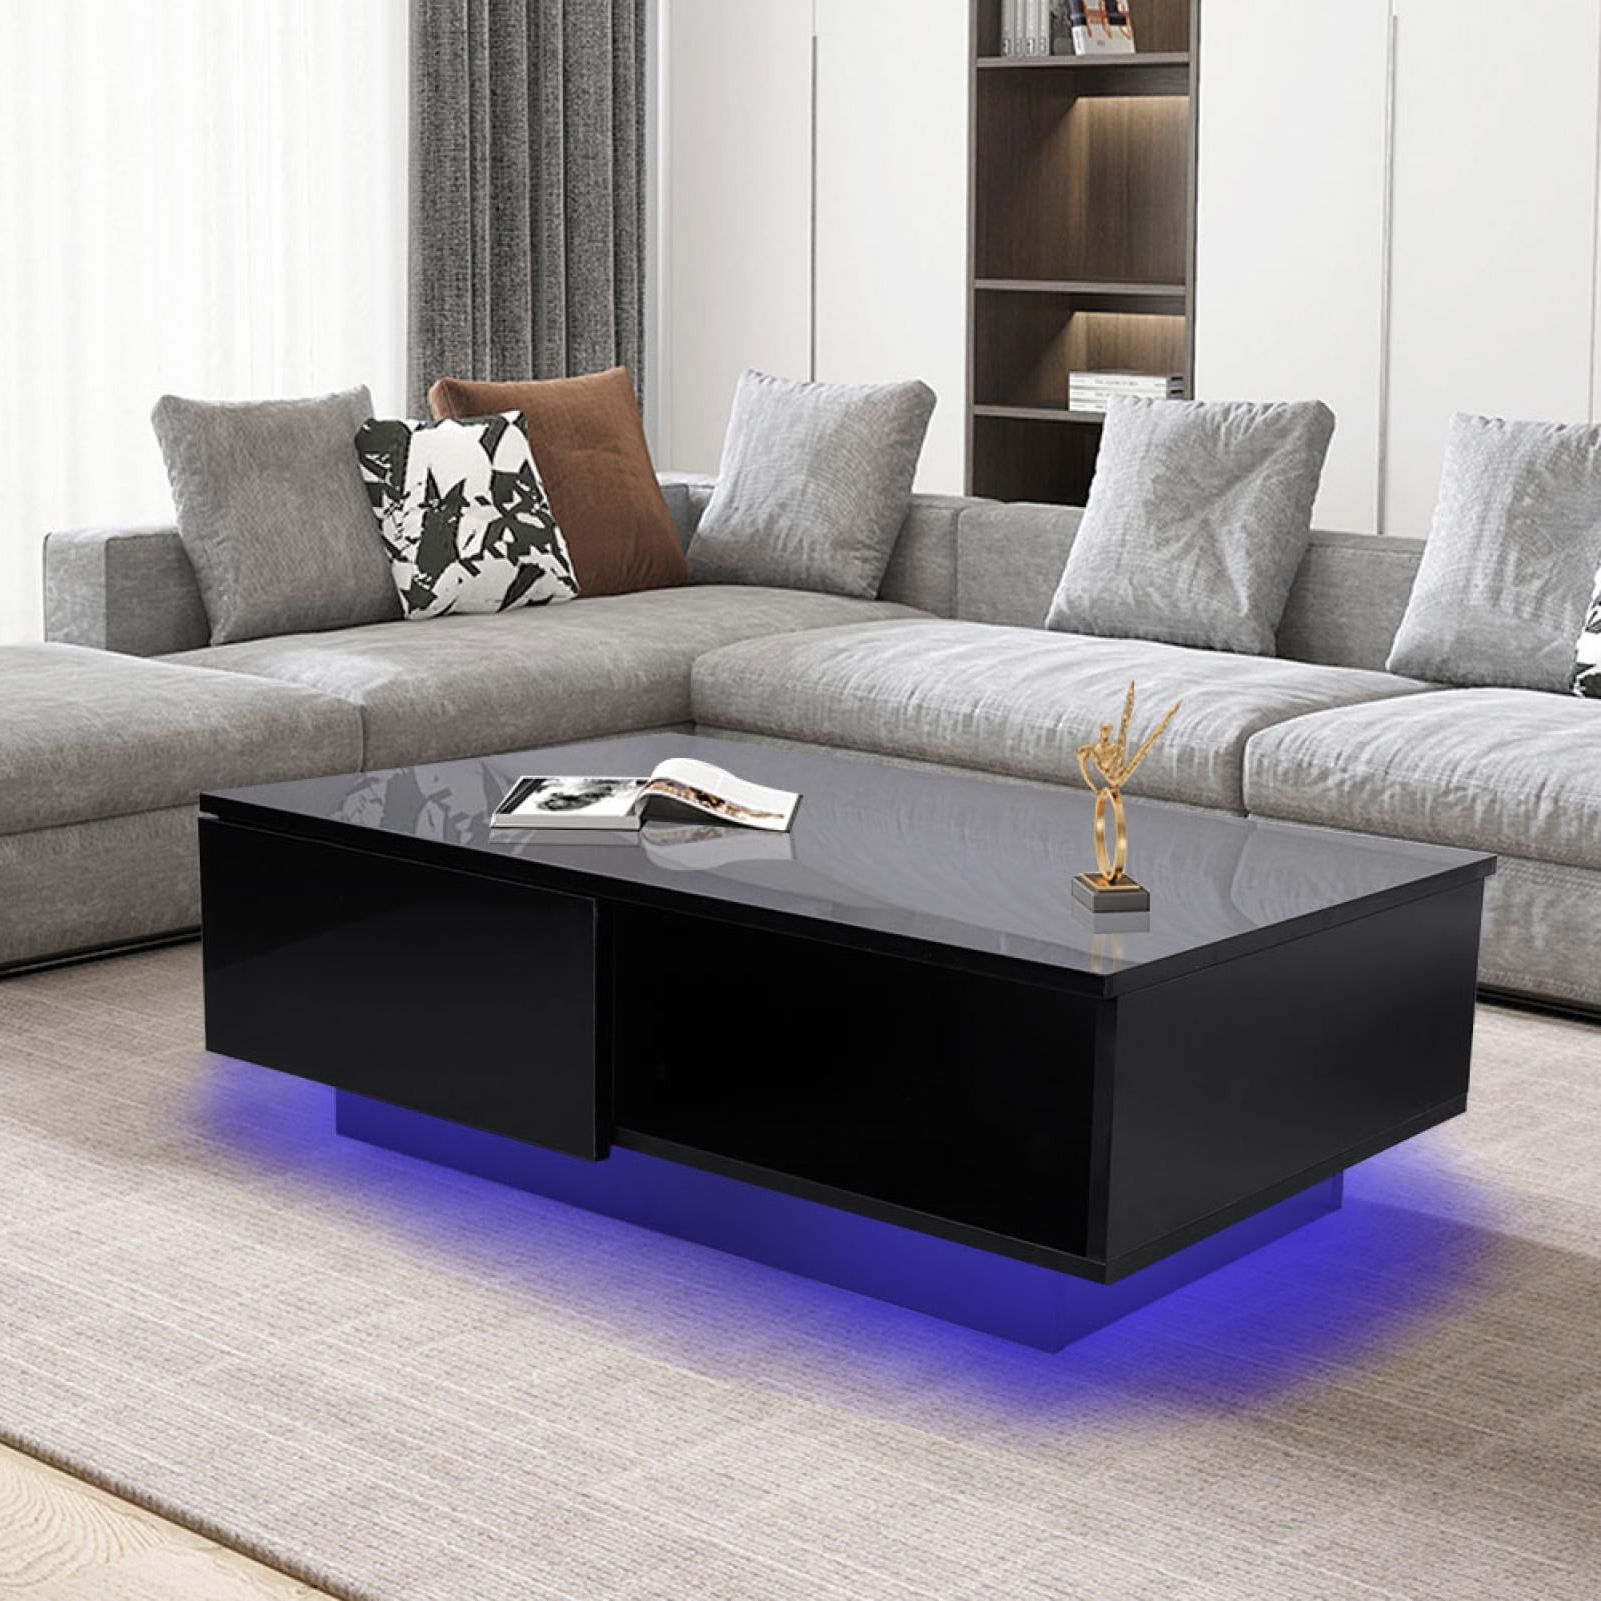 Ebtools Rectangle Led Coffee Table, Black Modern High Gloss Furniture Throughout Coffee Tables With Led Lights (View 5 of 20)